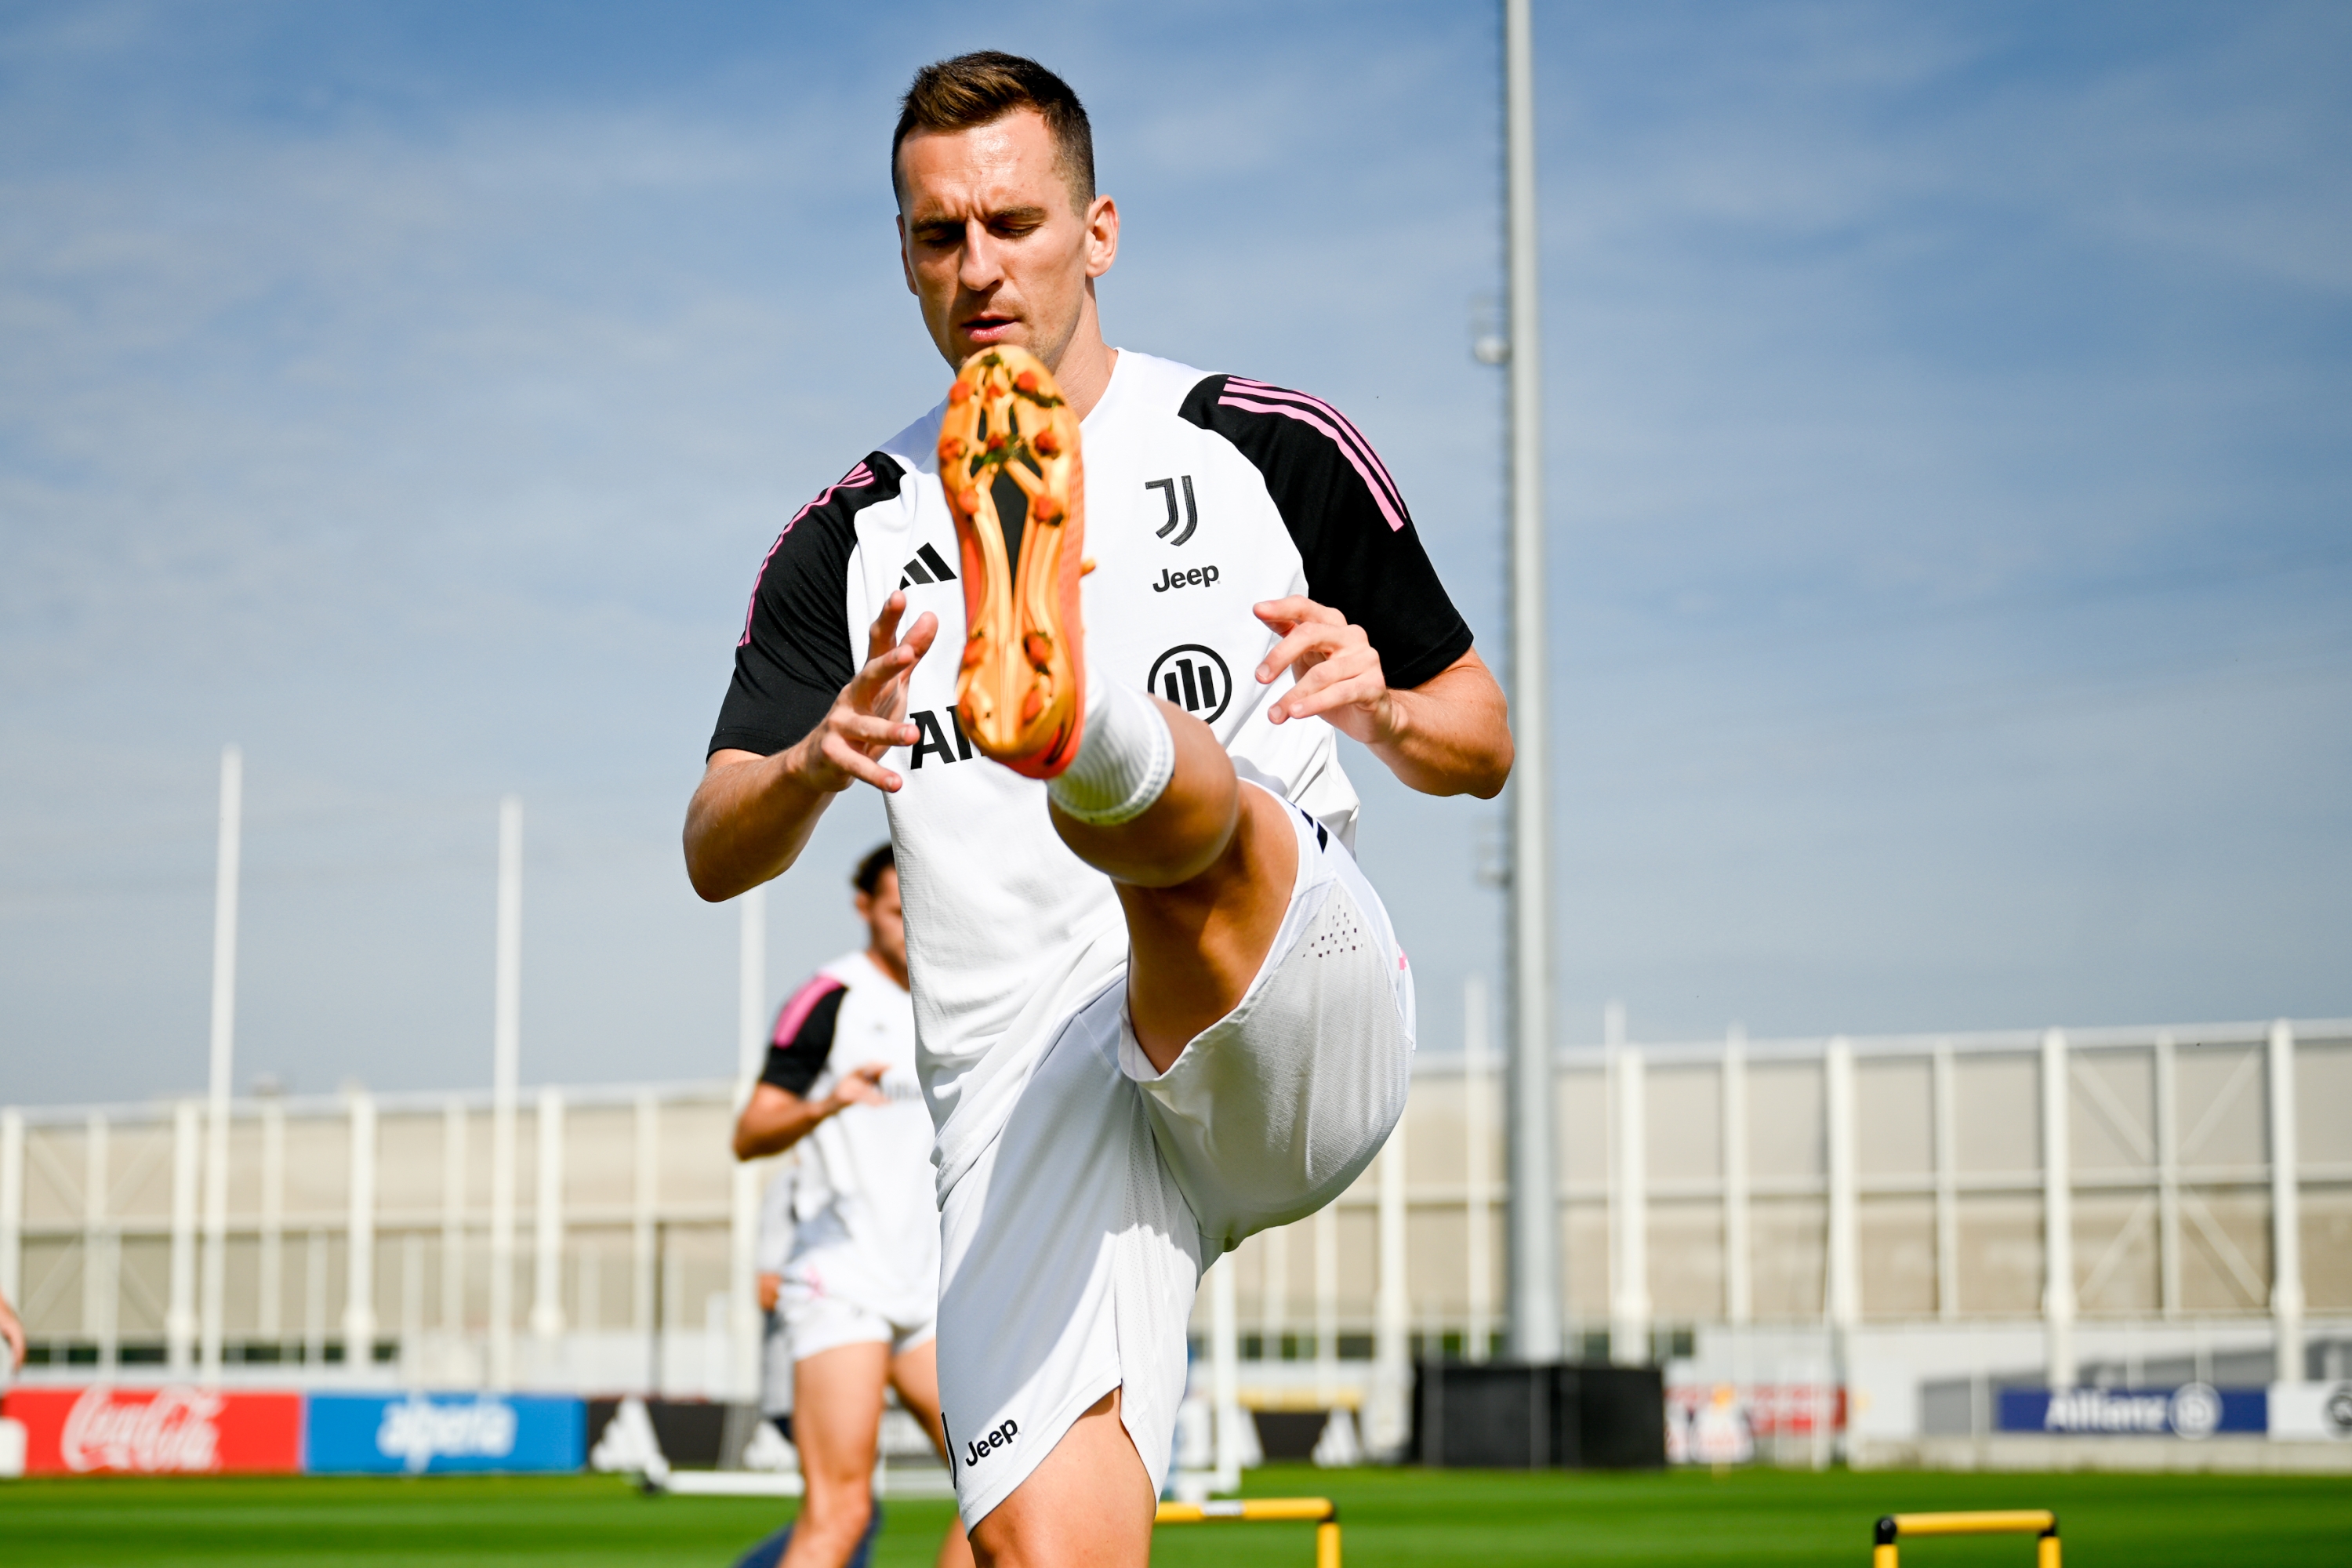 TURIN, ITALY - SEPTEMBER 28: Arkadiusz Krystian Milik of Juventus during a training session at JTC on September 28, 2023 in Turin, Italy. (Photo by Daniele Badolato - Juventus FC/Juventus FC via Getty Images)